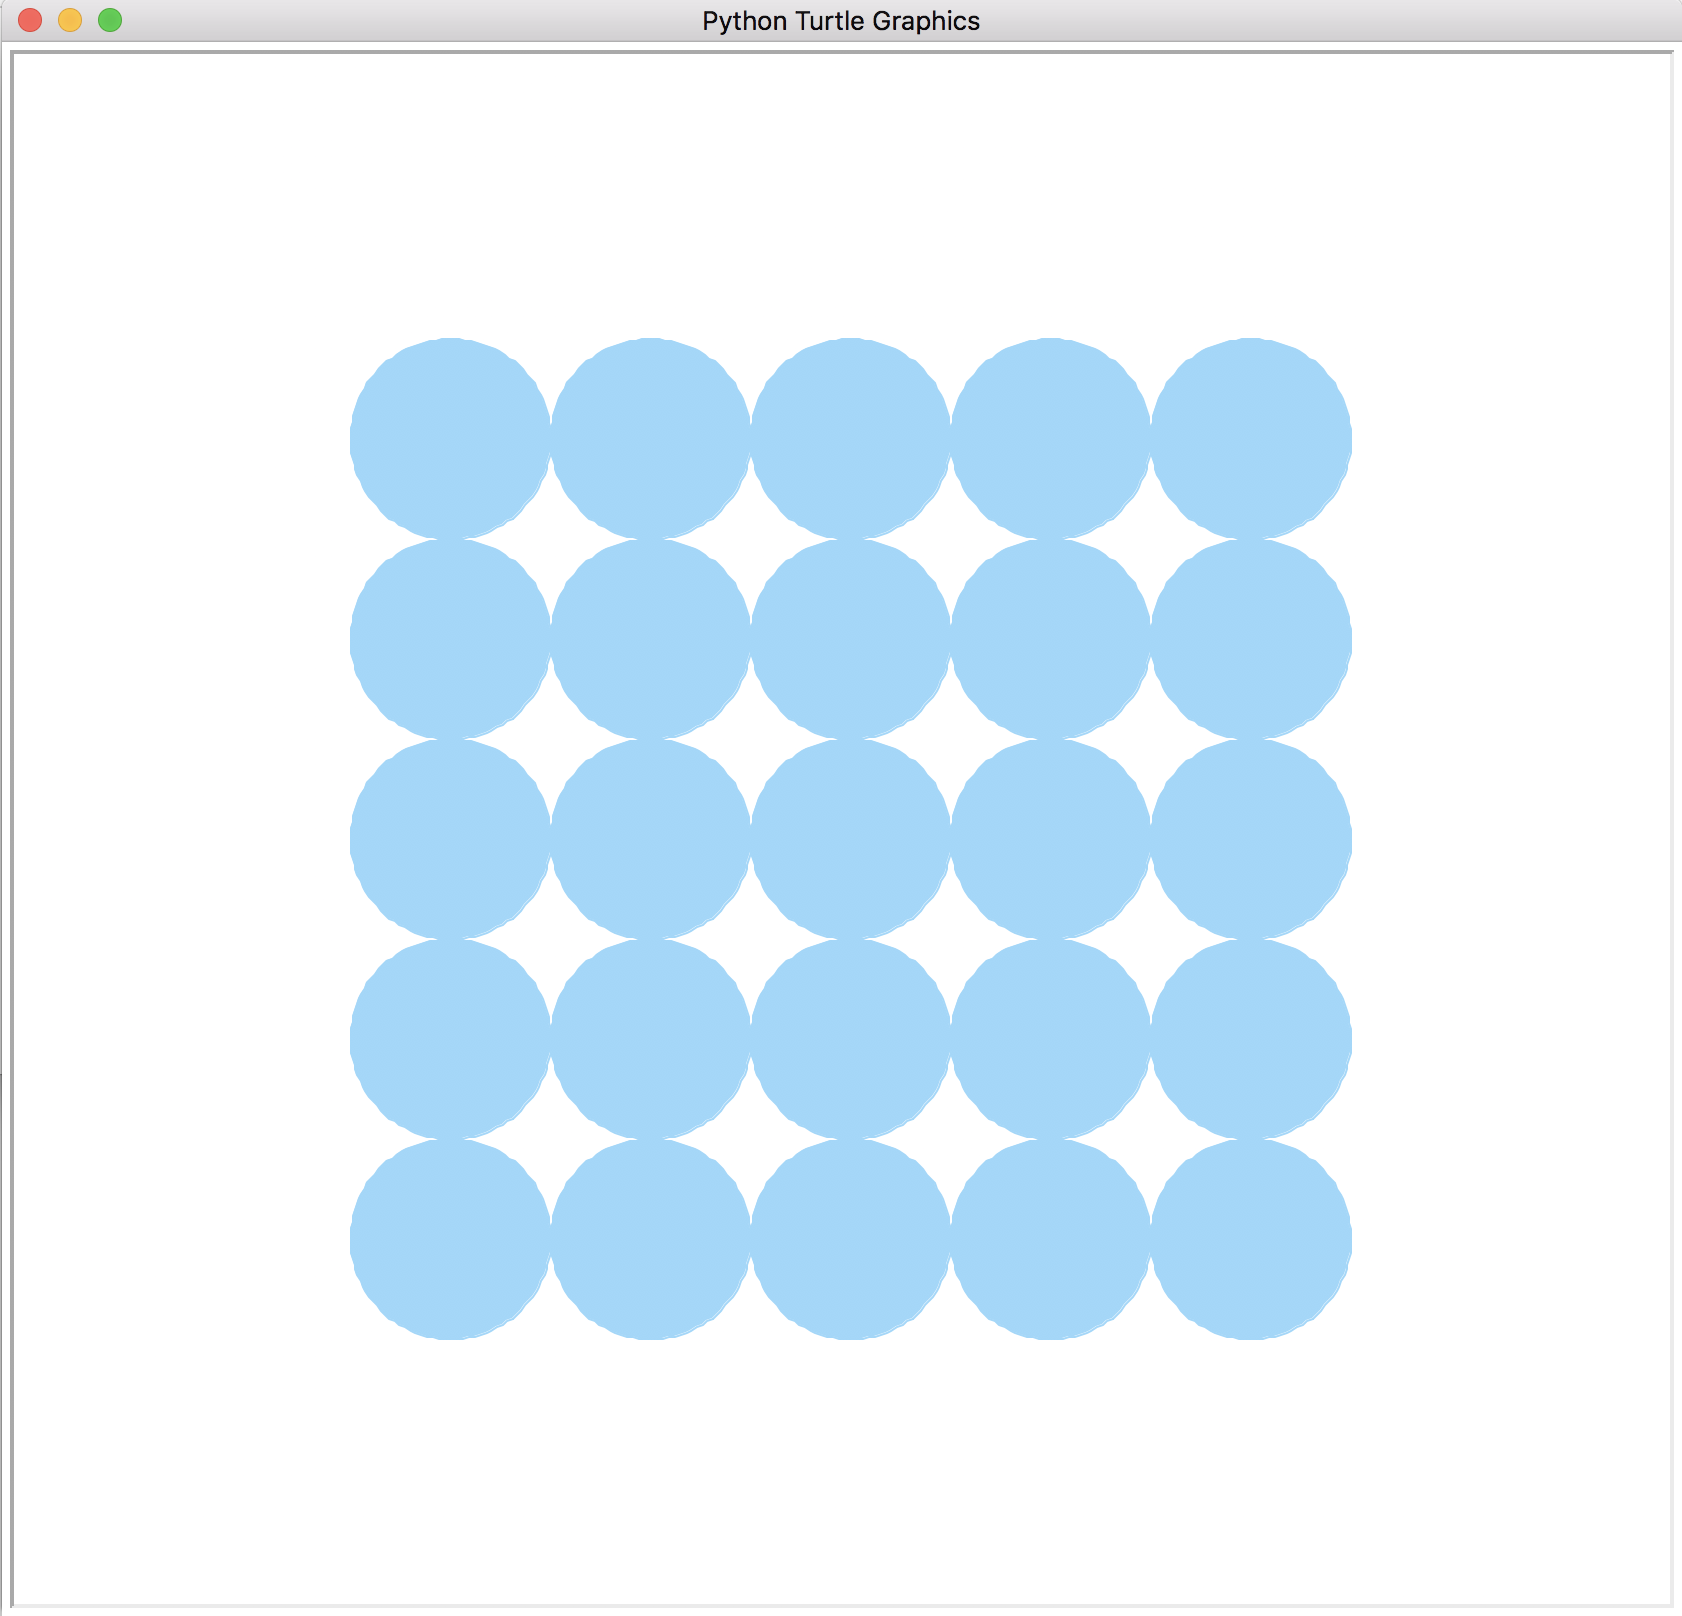 Turtle graphics display of a 5x5 grid of light blue circles.